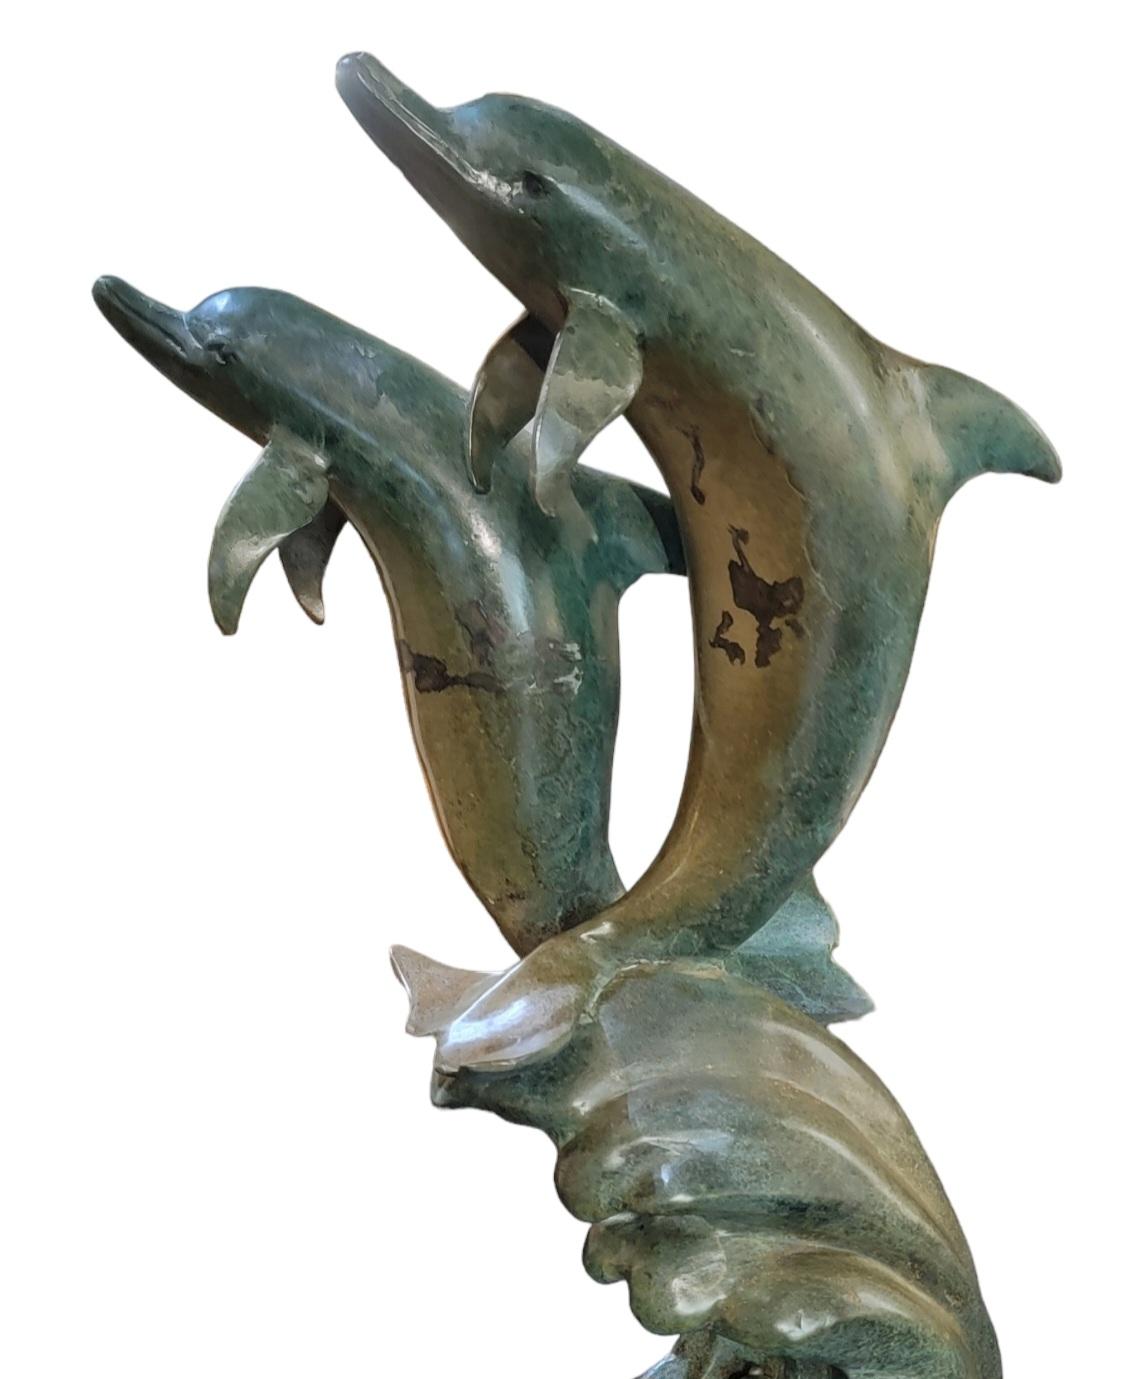 Magnificent Bronze Dolphine Garden Statue Measures approx - 52h x 25 diameter

This garden fountain / garden statue is a beautiful garden element that demands its own space. The base of the fountain has dolphin motifs all around the center of the